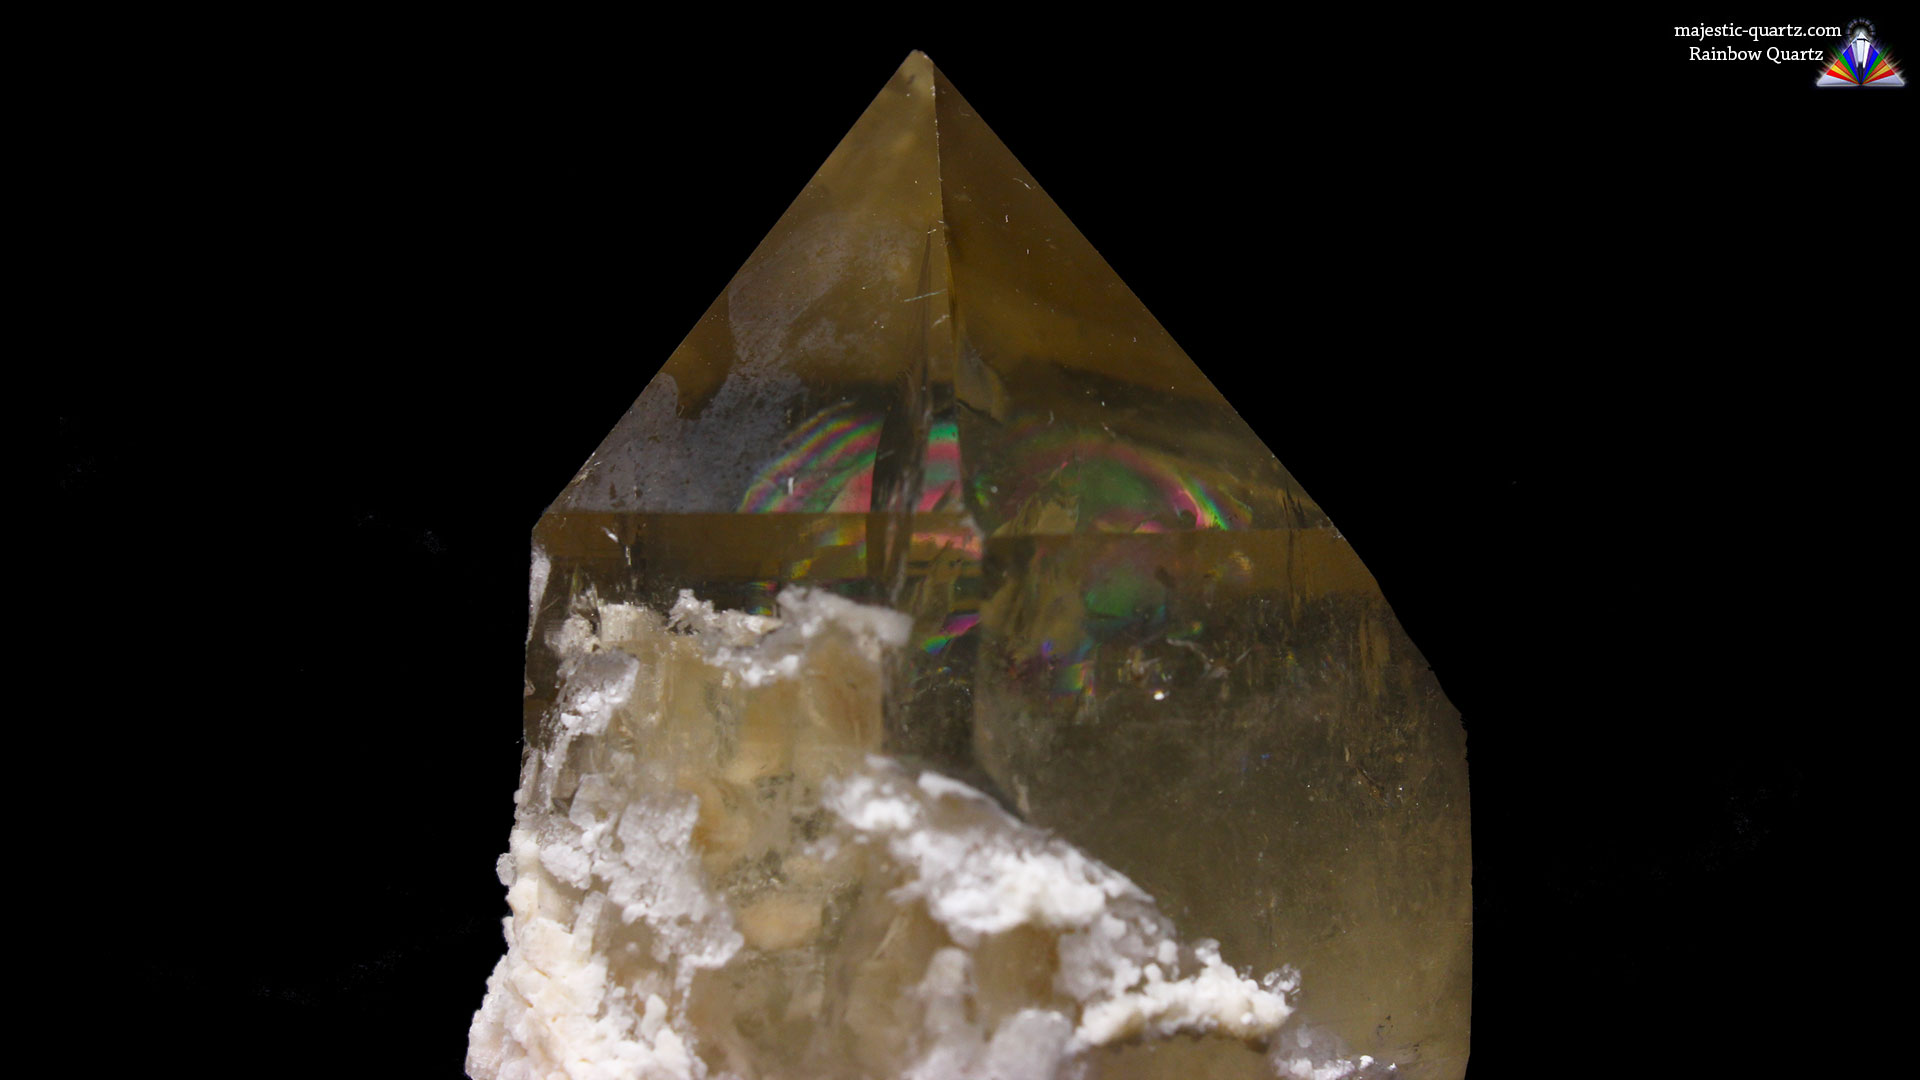 Large Quartz Crystal uncleaned with Internal Rainbows